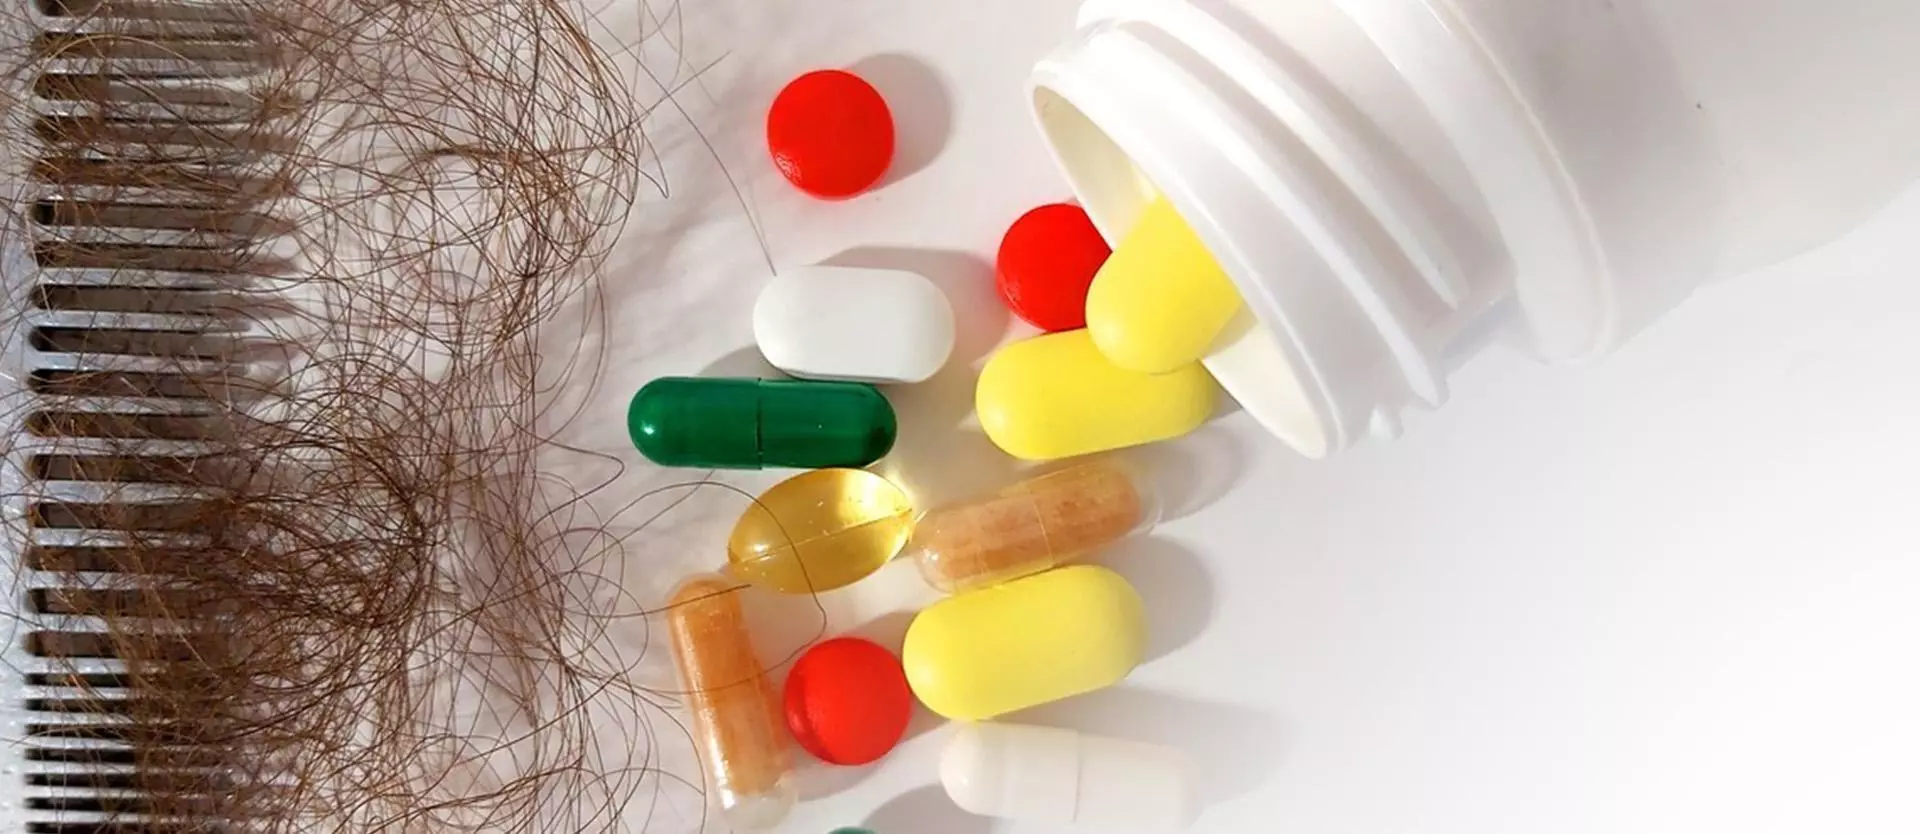 Can Supplements Help with Hair Growth?